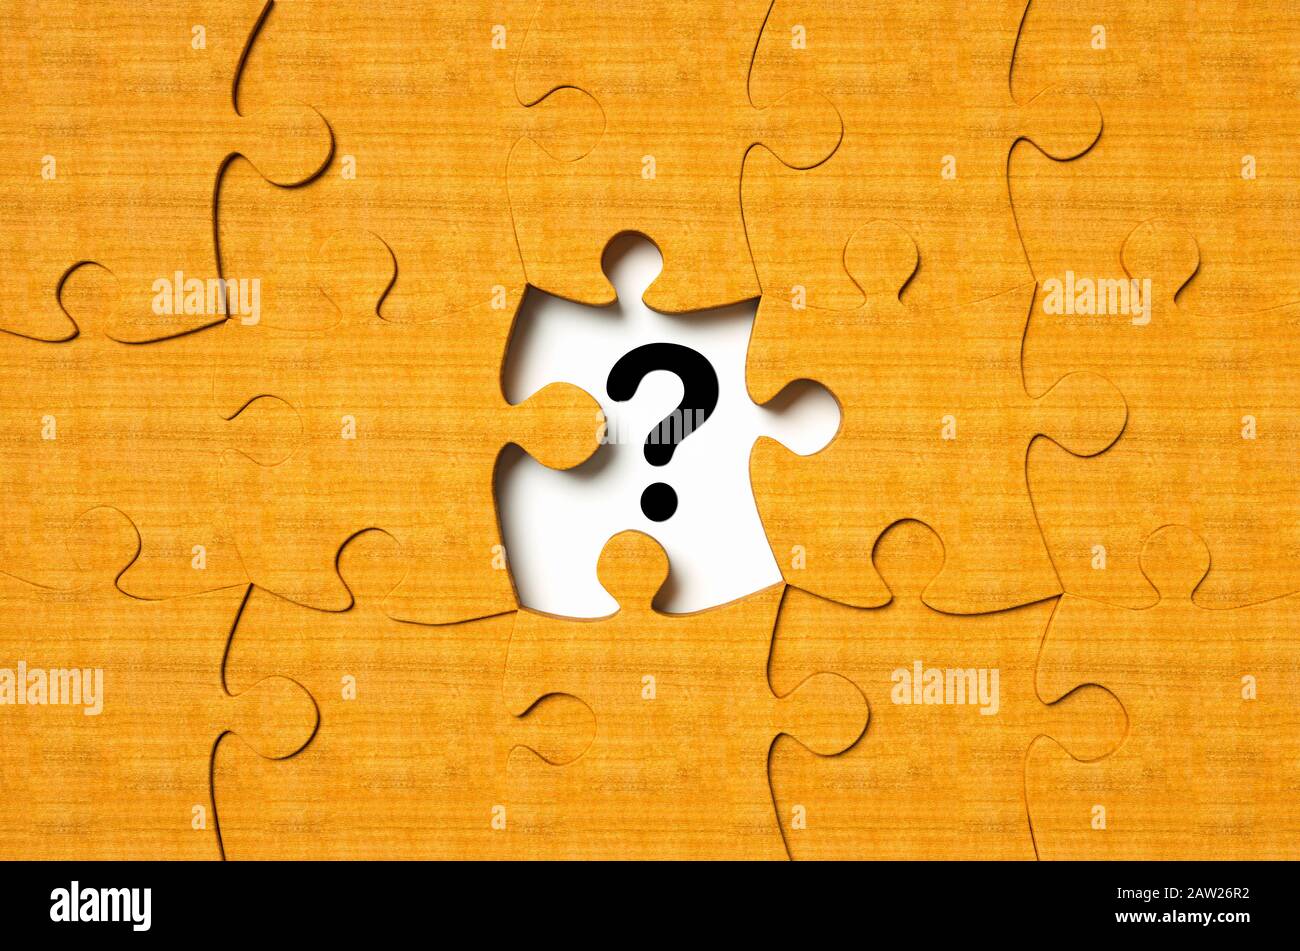 Blank wooden jigsaw puzzle with one piece missing and question mark symbol Stock Photo